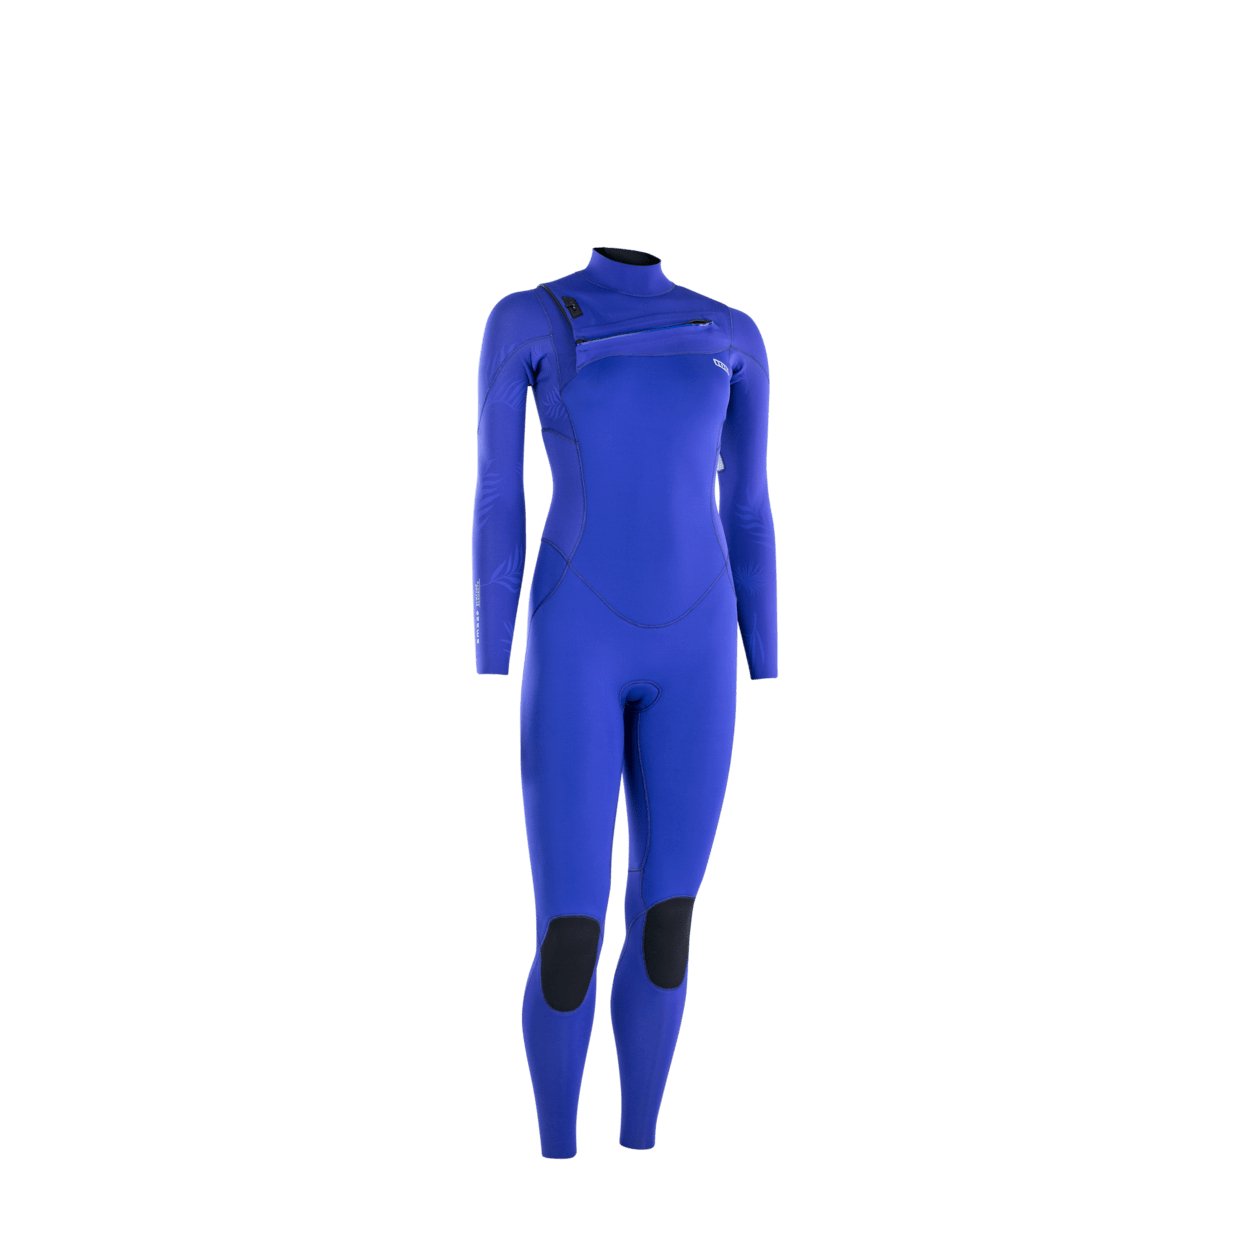 ION Amaze Core 3/2 Front Zip 2022 - Worthing Watersports - 9010583058146 - Wetsuits - ION Water